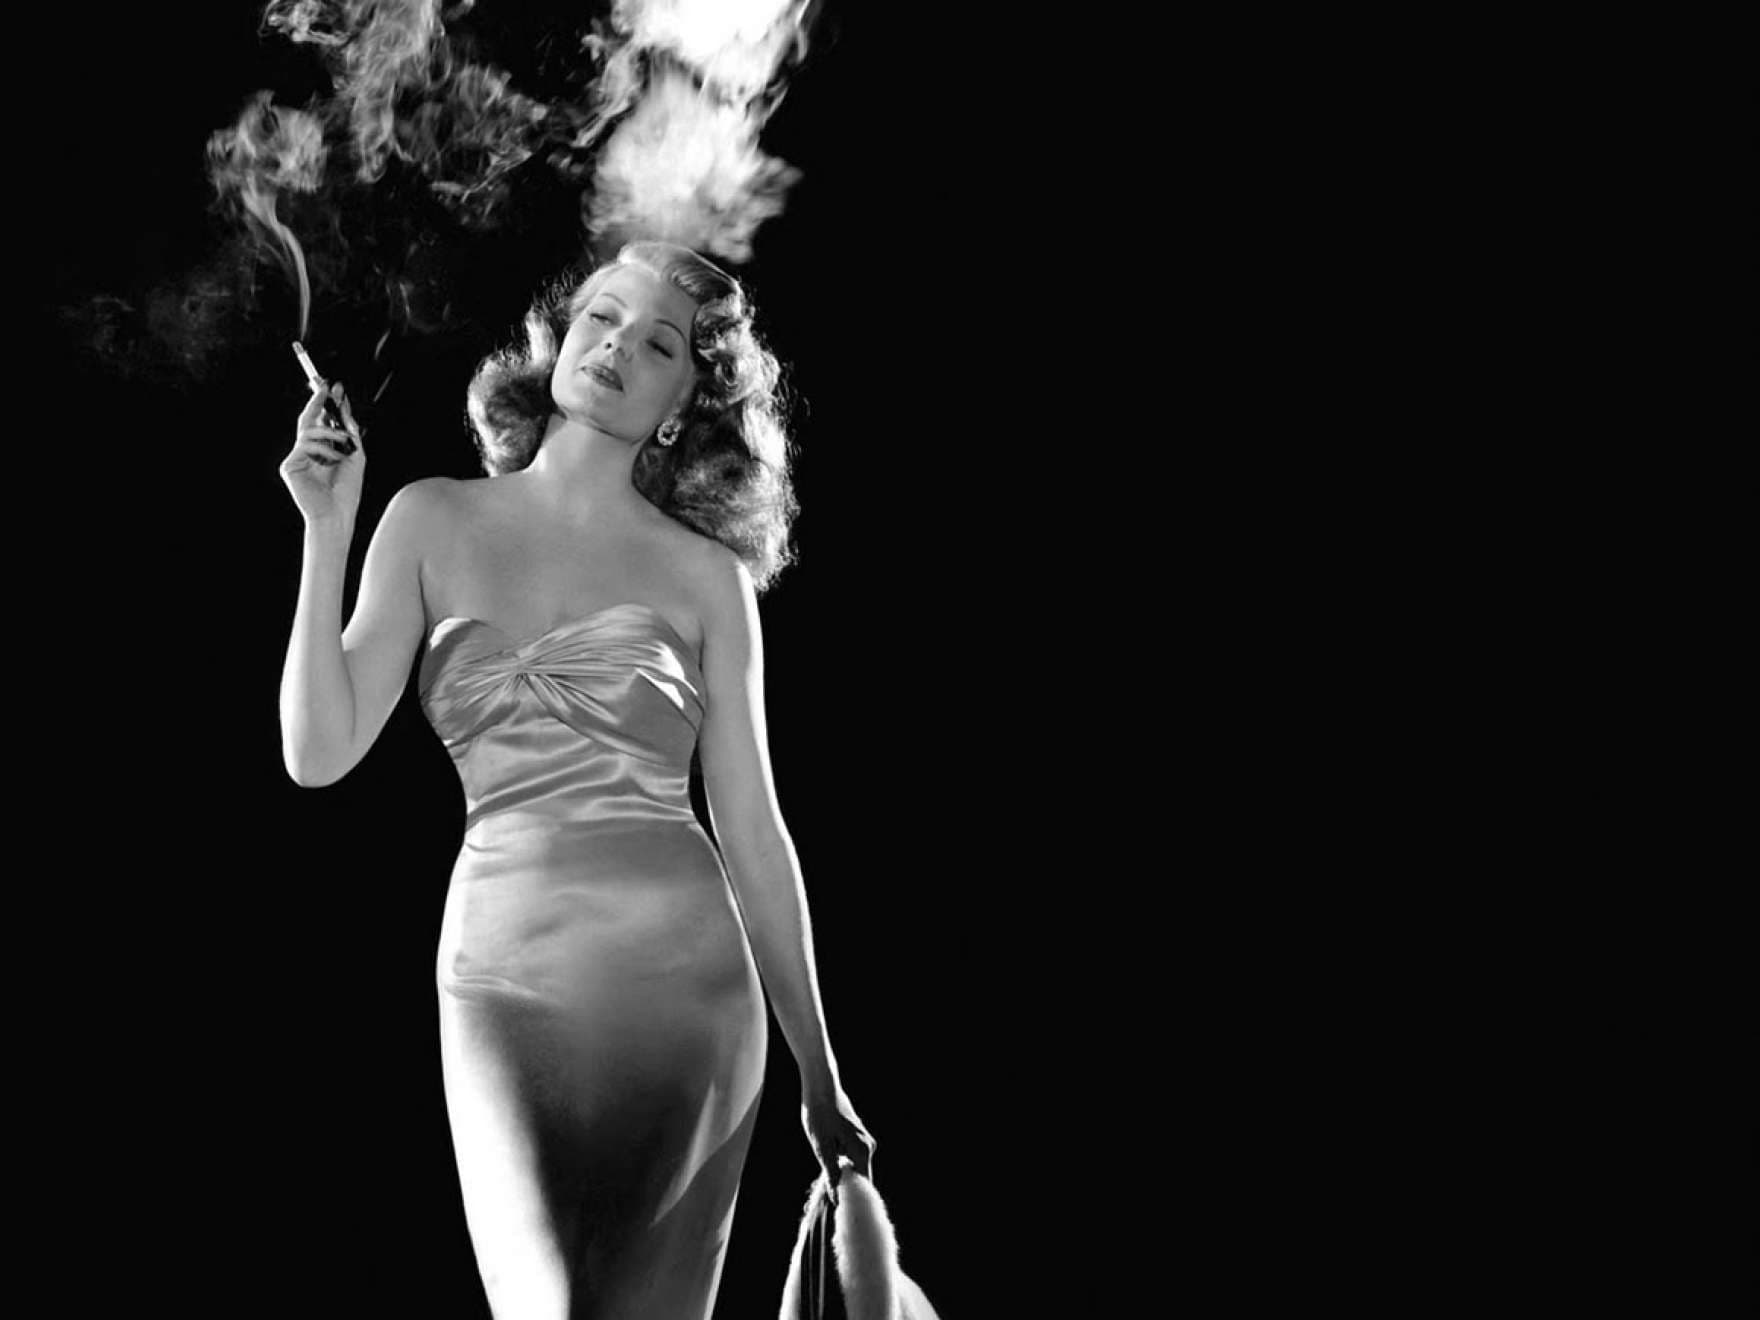 MFA Proves The '50s Femme Fatale Archetype Has Evolved Into The